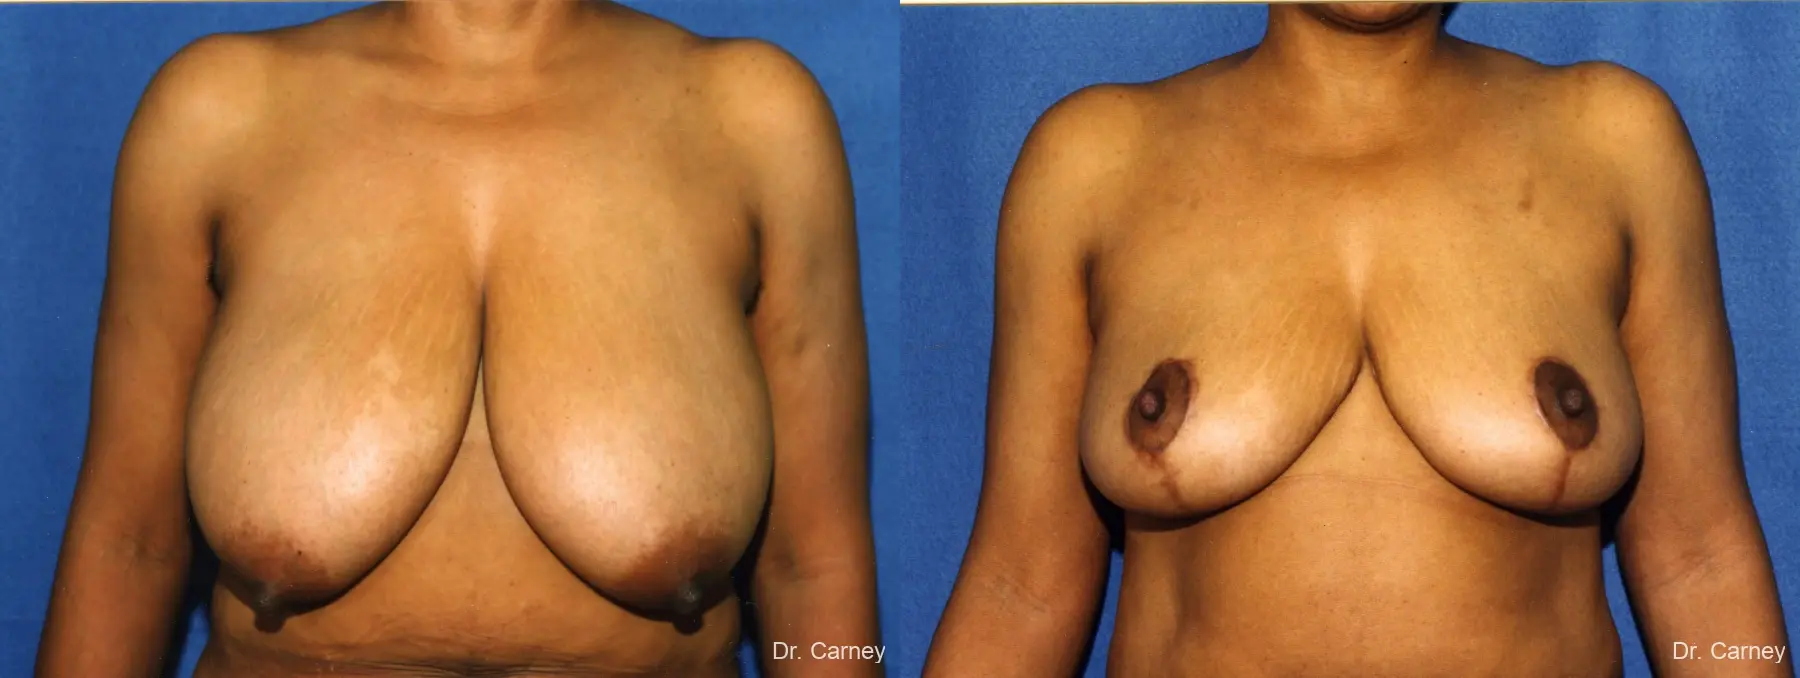 Virginia Beach Breast Reduction 1228. - Before and After